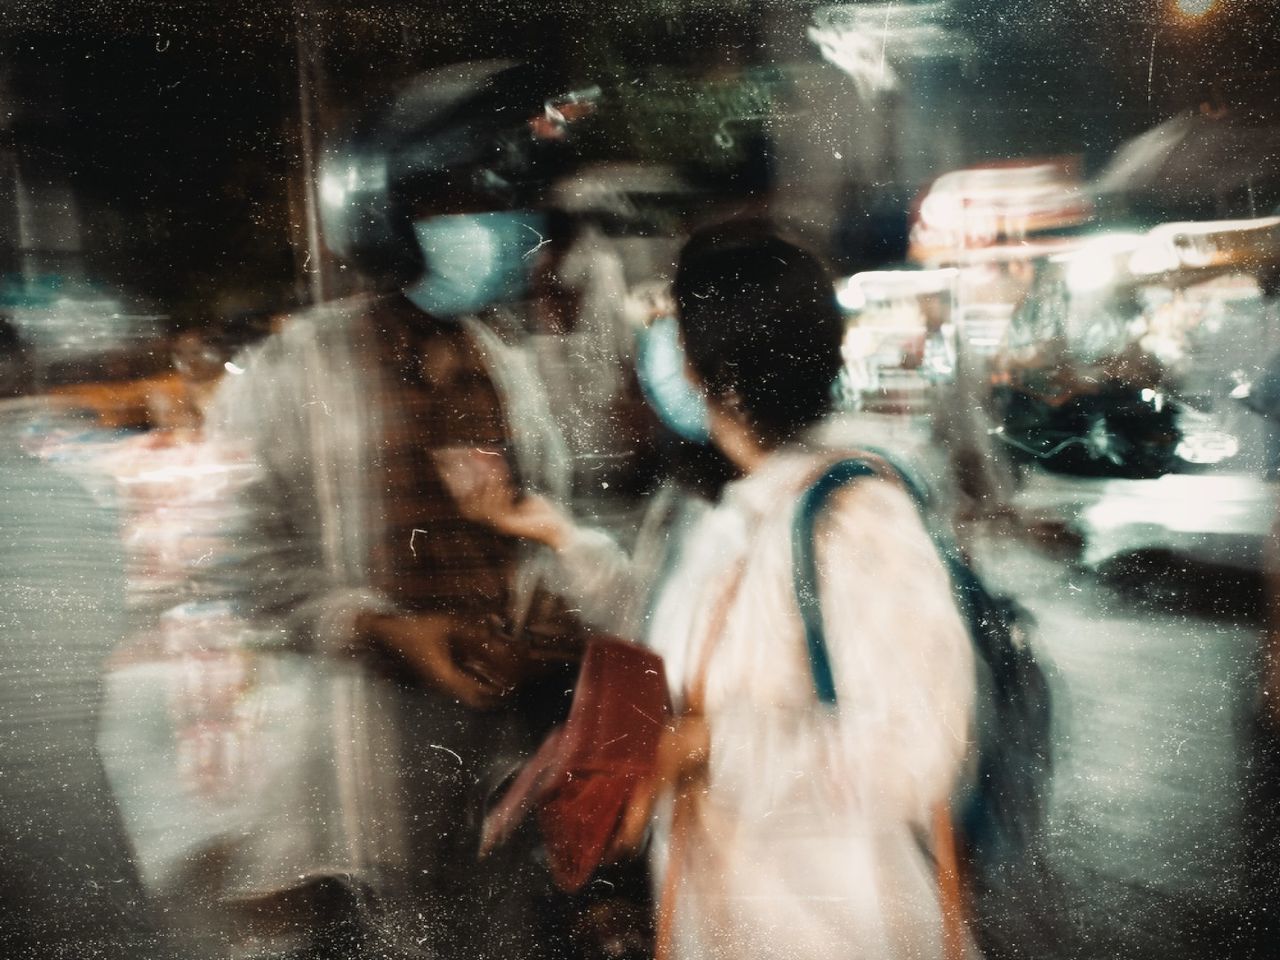 glass, adult, window, transparent, reflection, wet, women, motion, men, group of people, city, indoors, young adult, rain, emotion, blurred motion, lifestyles, waist up, architecture, night, water, digital composite